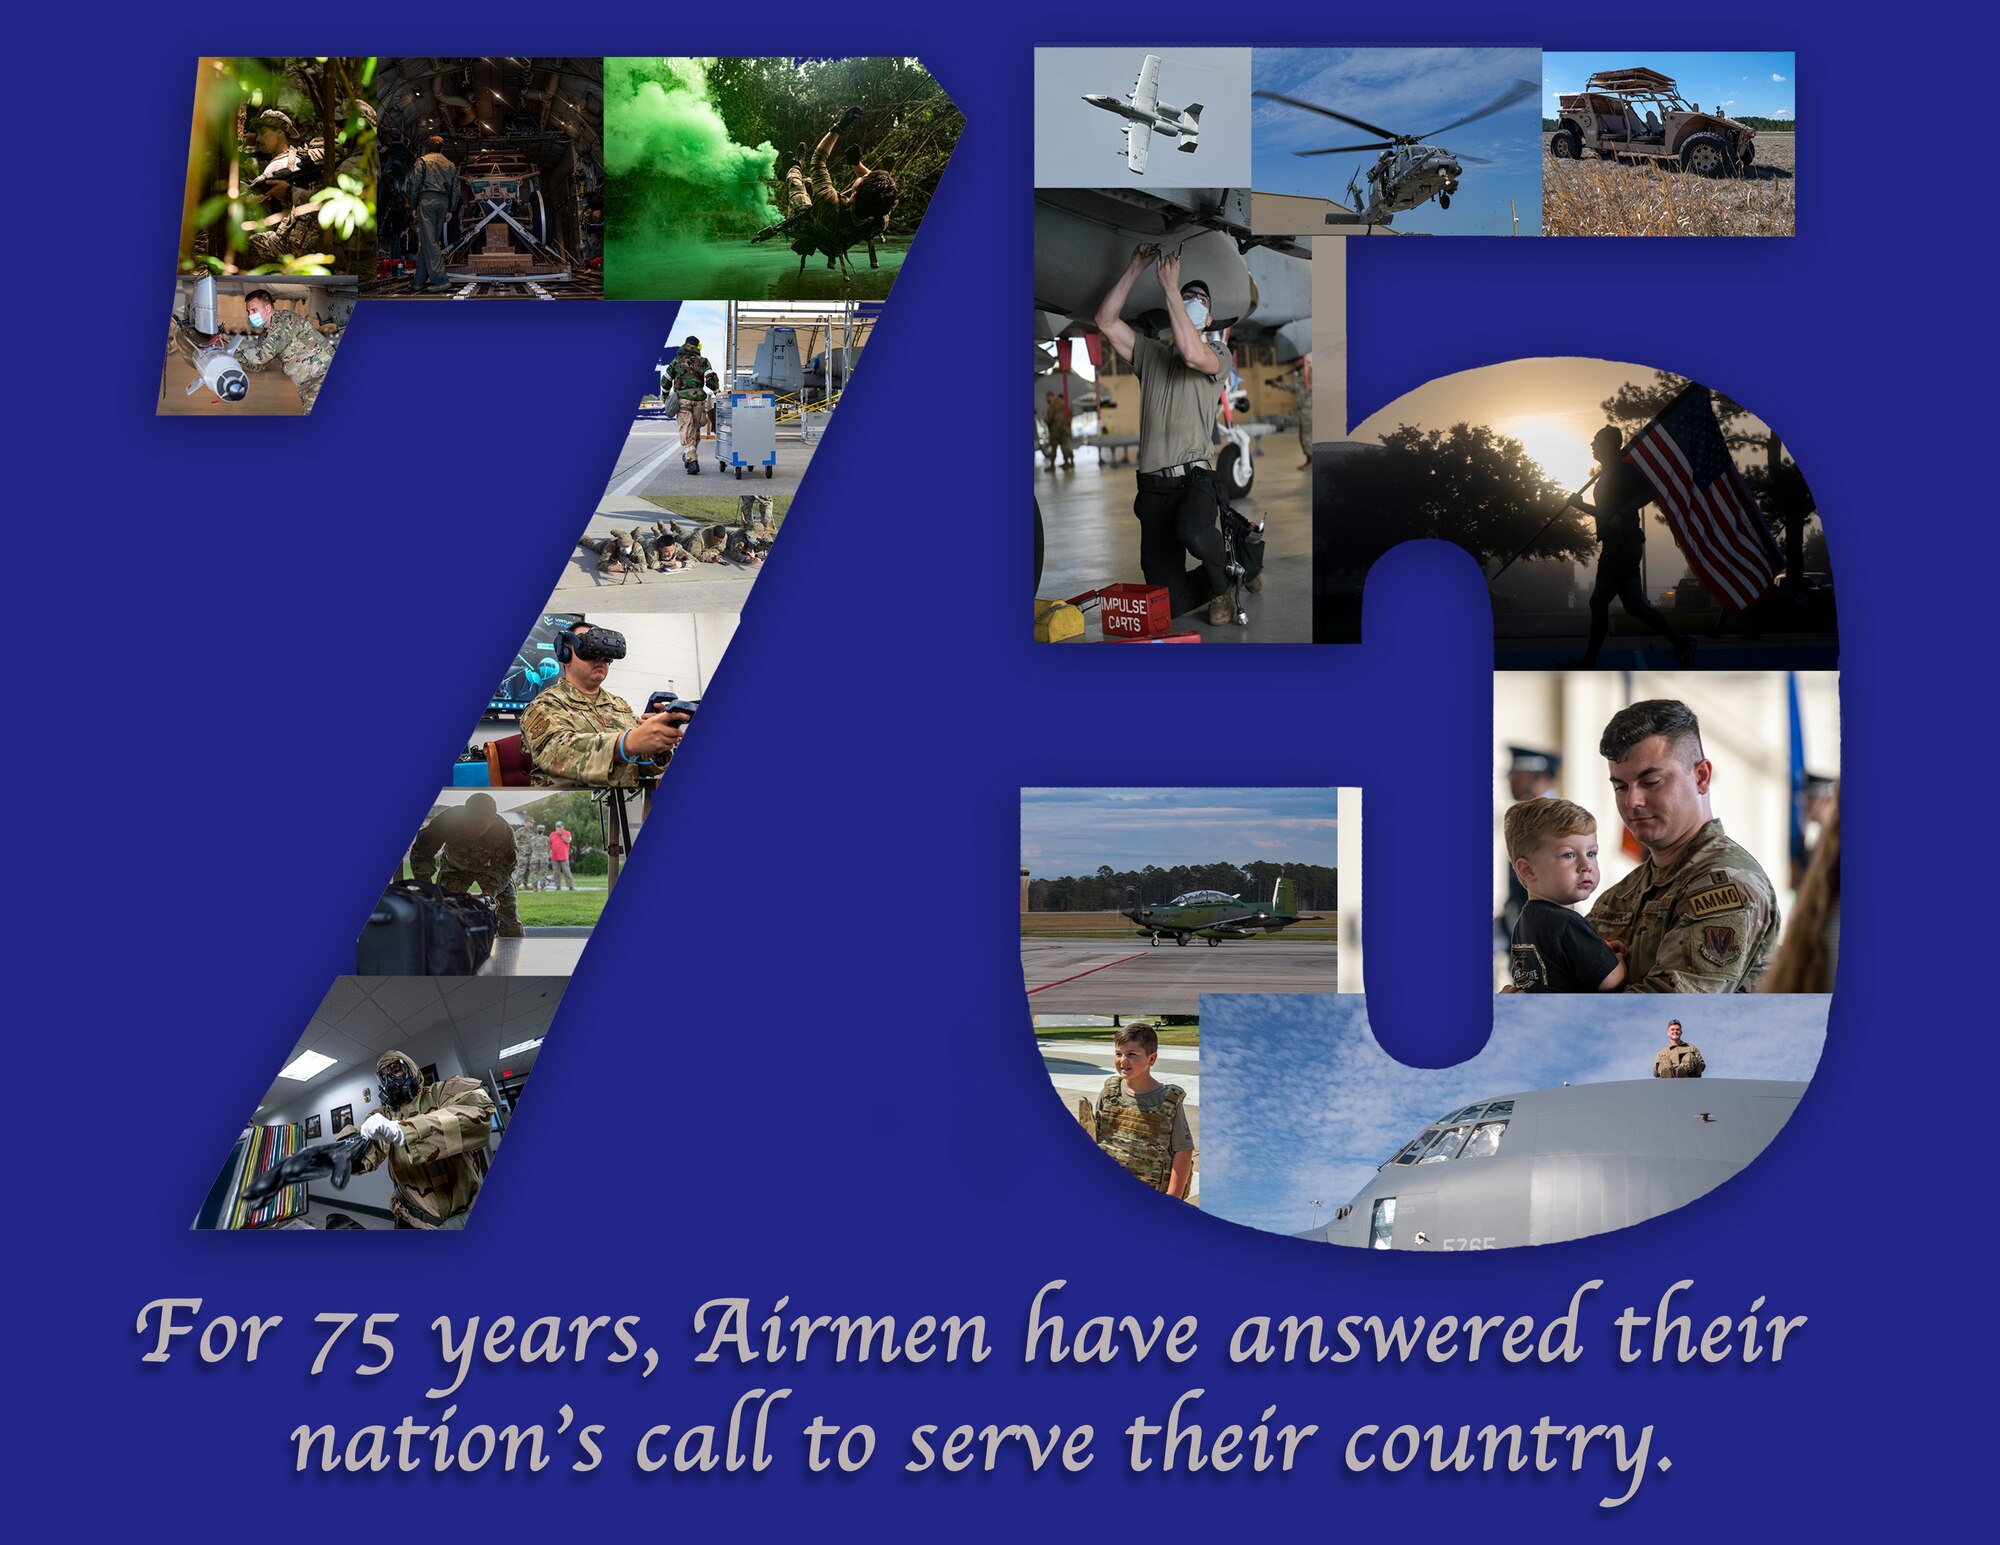 For 75 years, Airmen have answered their nation's call to serve their country. Graphic depicts various images in the shape of a 75.